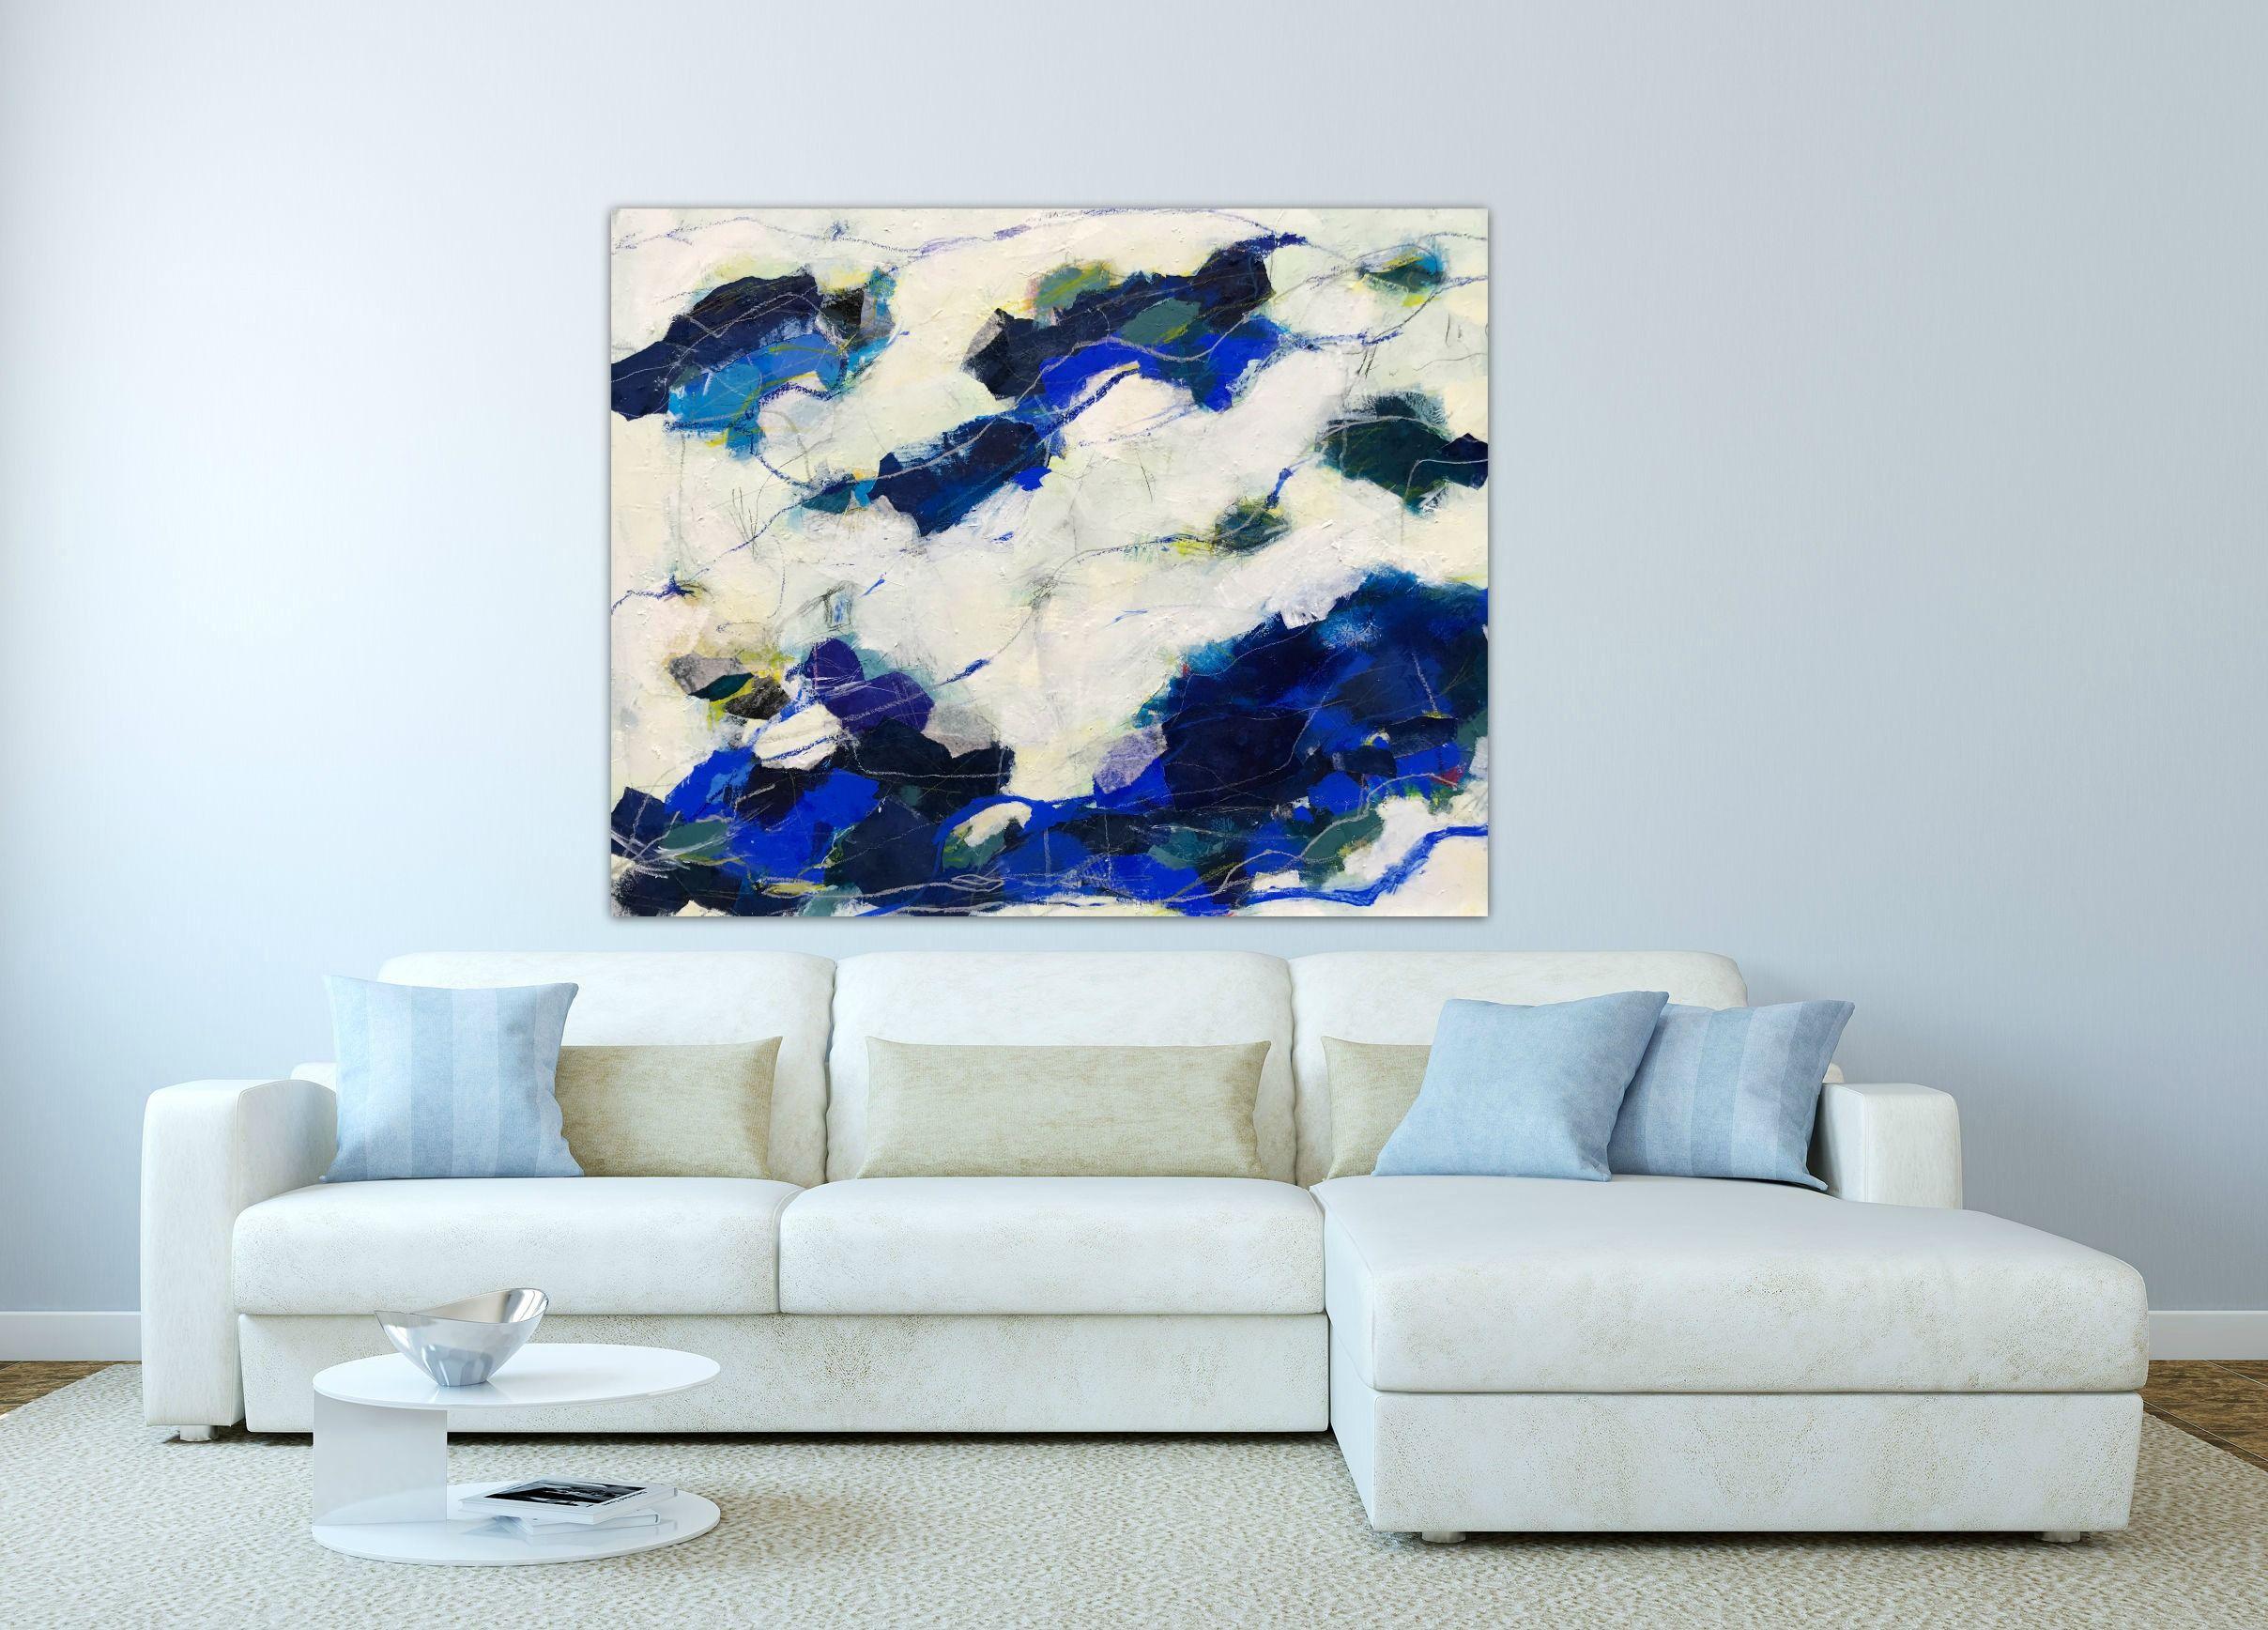 This beautifully dynamic piece with striking ultramarine pigment is attempting to reflect the moment of gliding into cool water, just breathing in and out, and noticing the cool water on the skin.    The painting has been built over many layers of